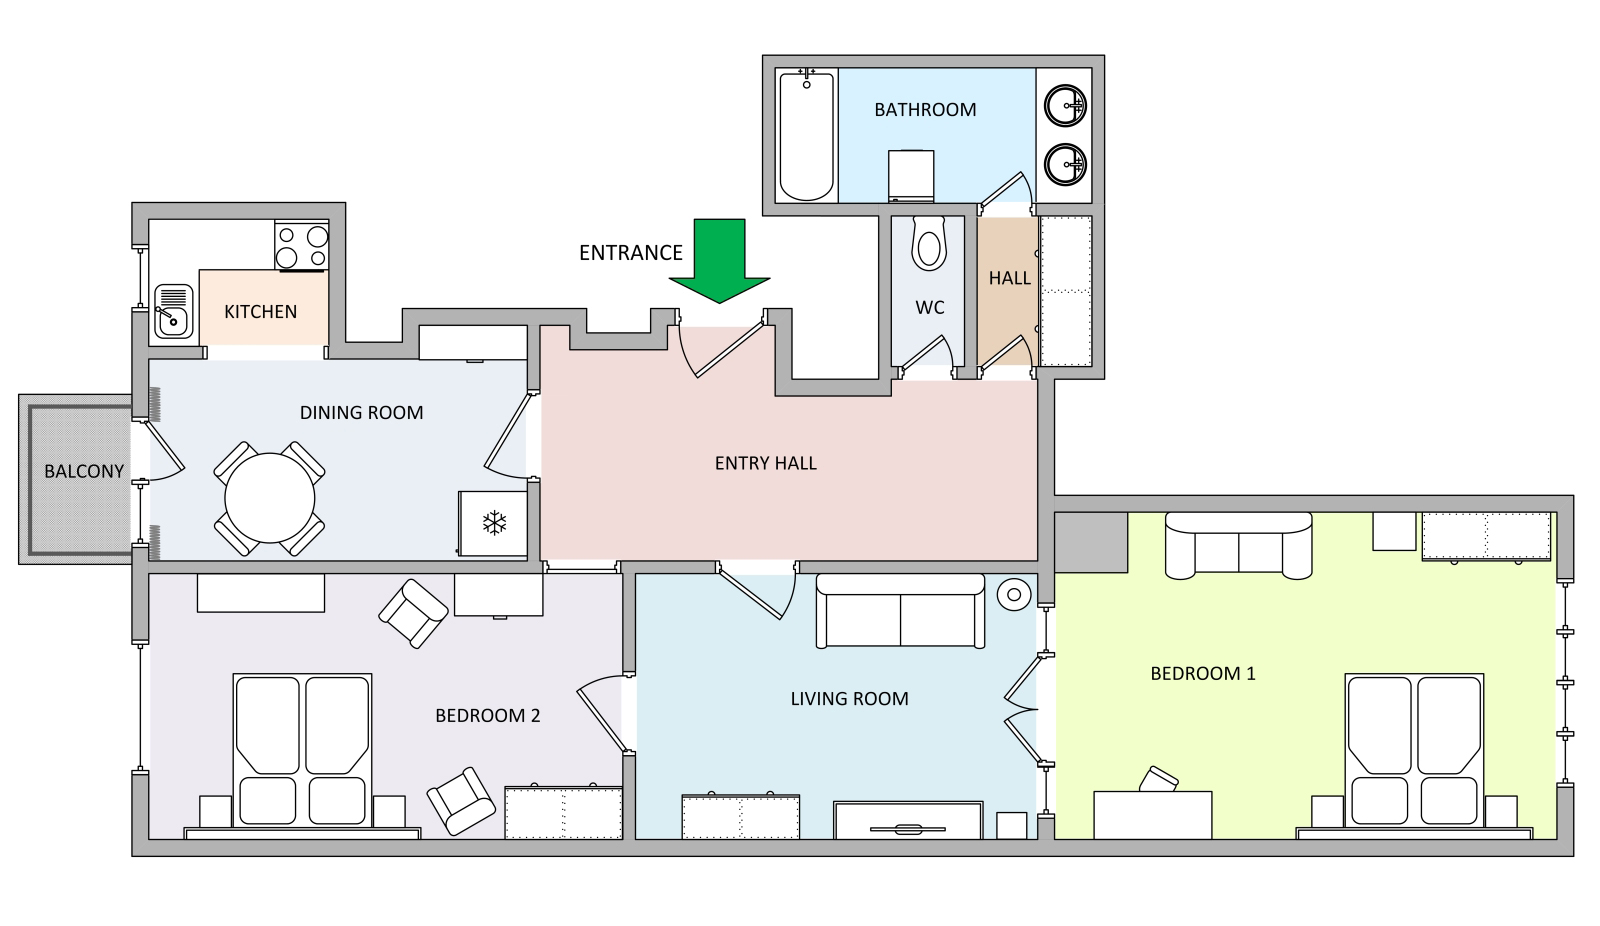 Floorplan of apartment 22 in National Theatre Apartments residence in Prague